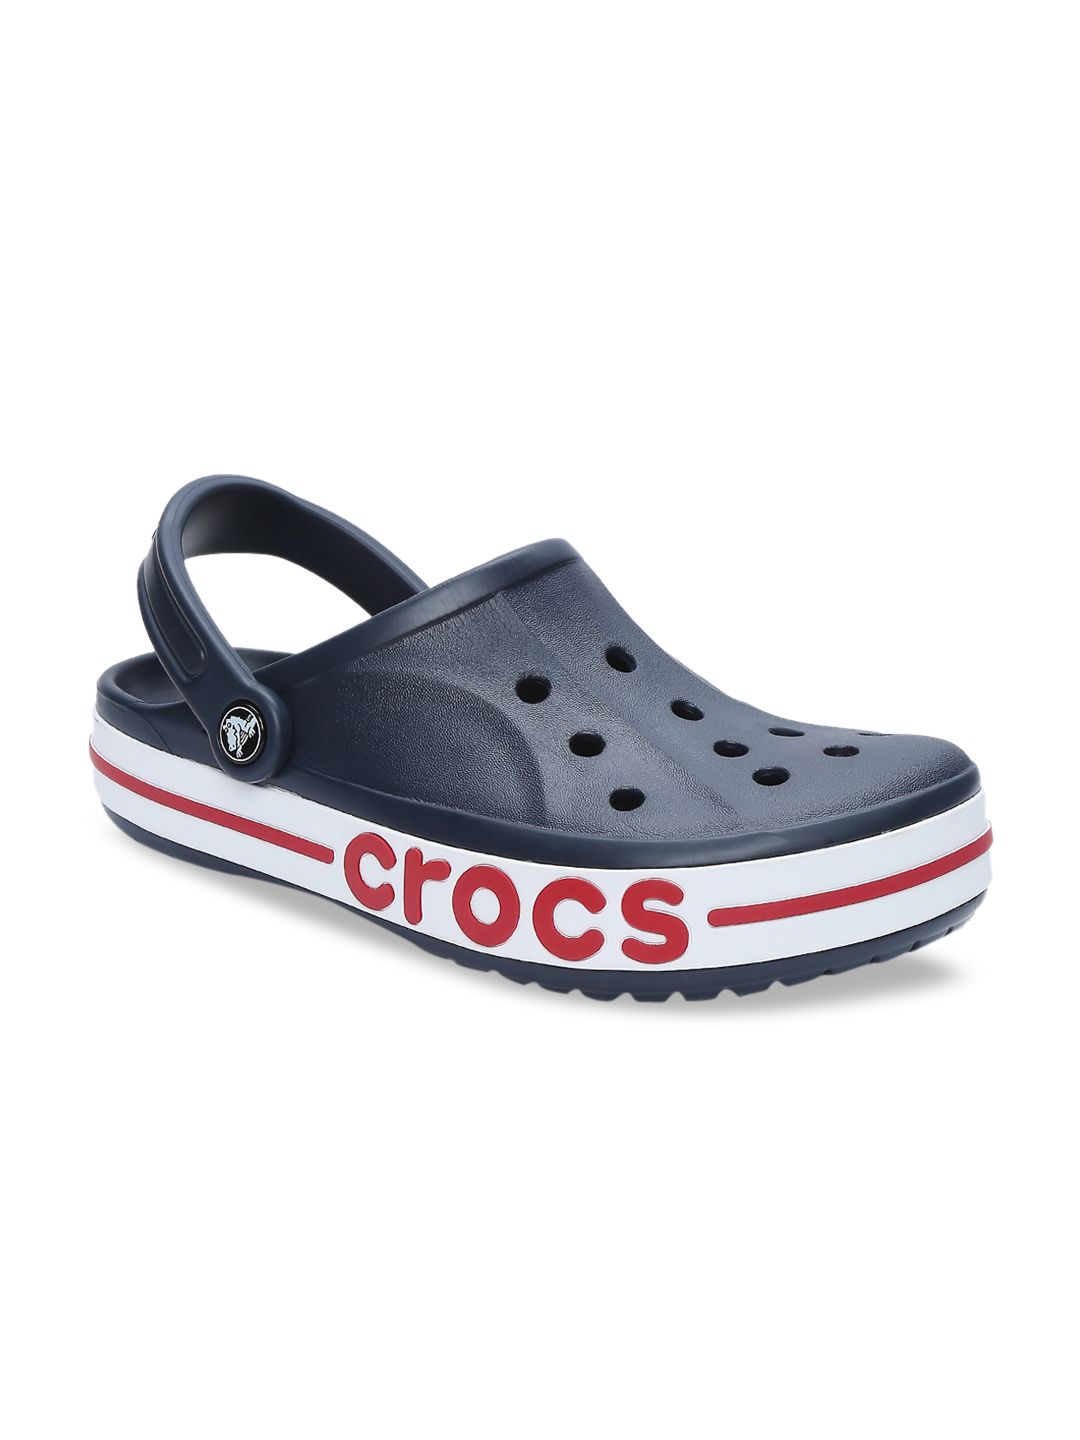 Crocs Bayaband Unisex Navy Blue Solid Clogs Price in India